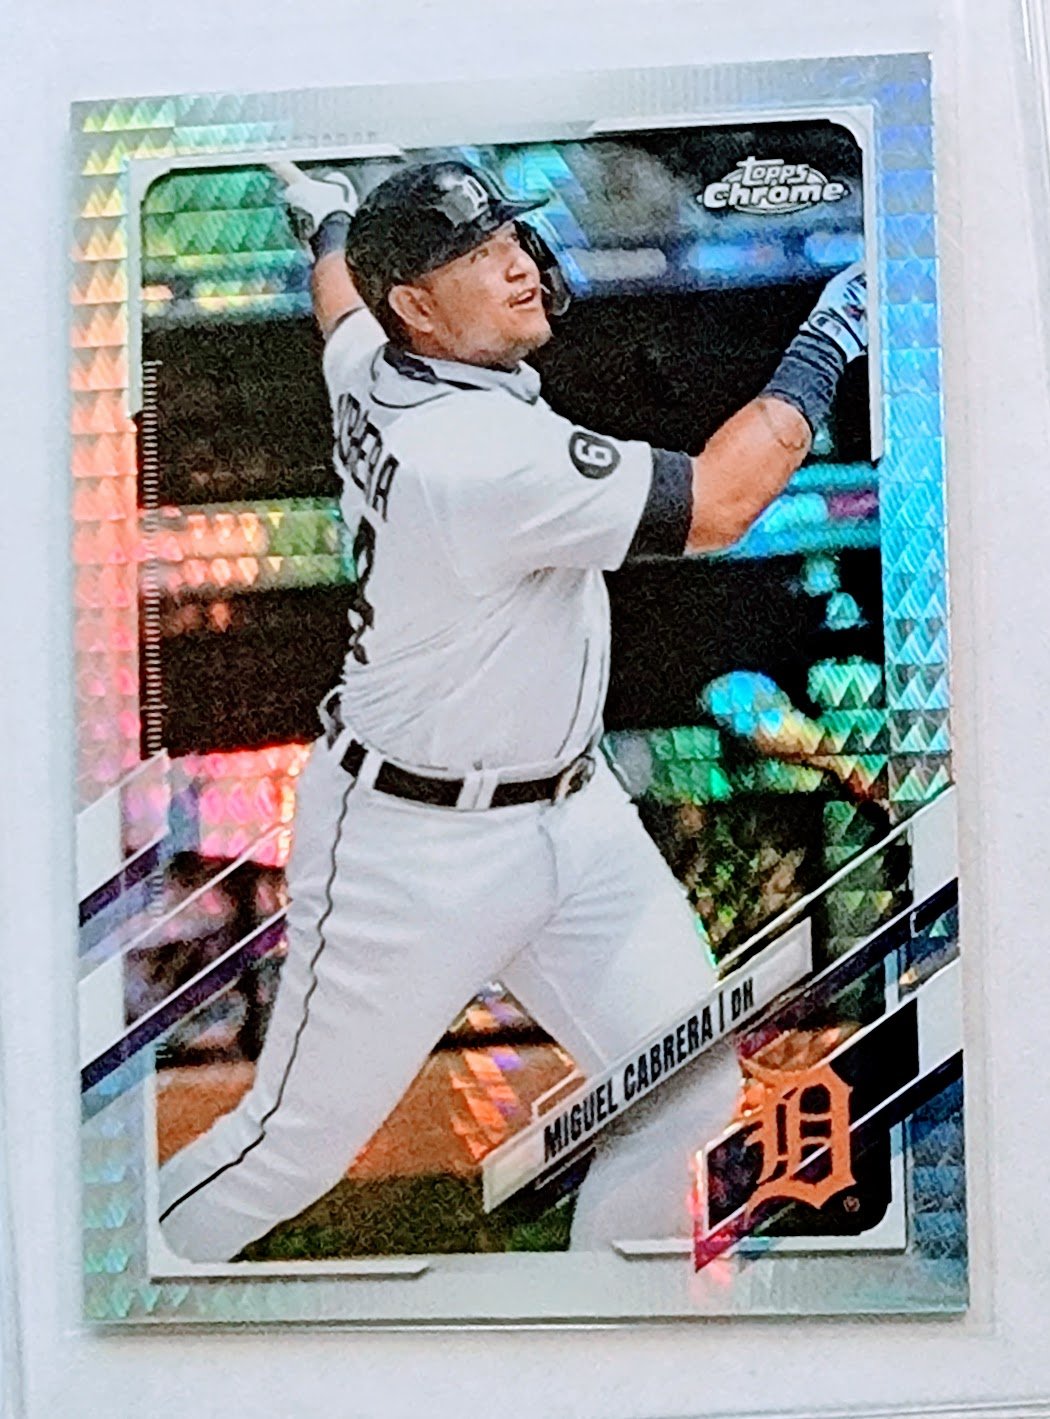 2021 Topps Chrome Miguel Cabrera Prism Refractor Baseball Card TPTV simple Xclusive Collectibles   